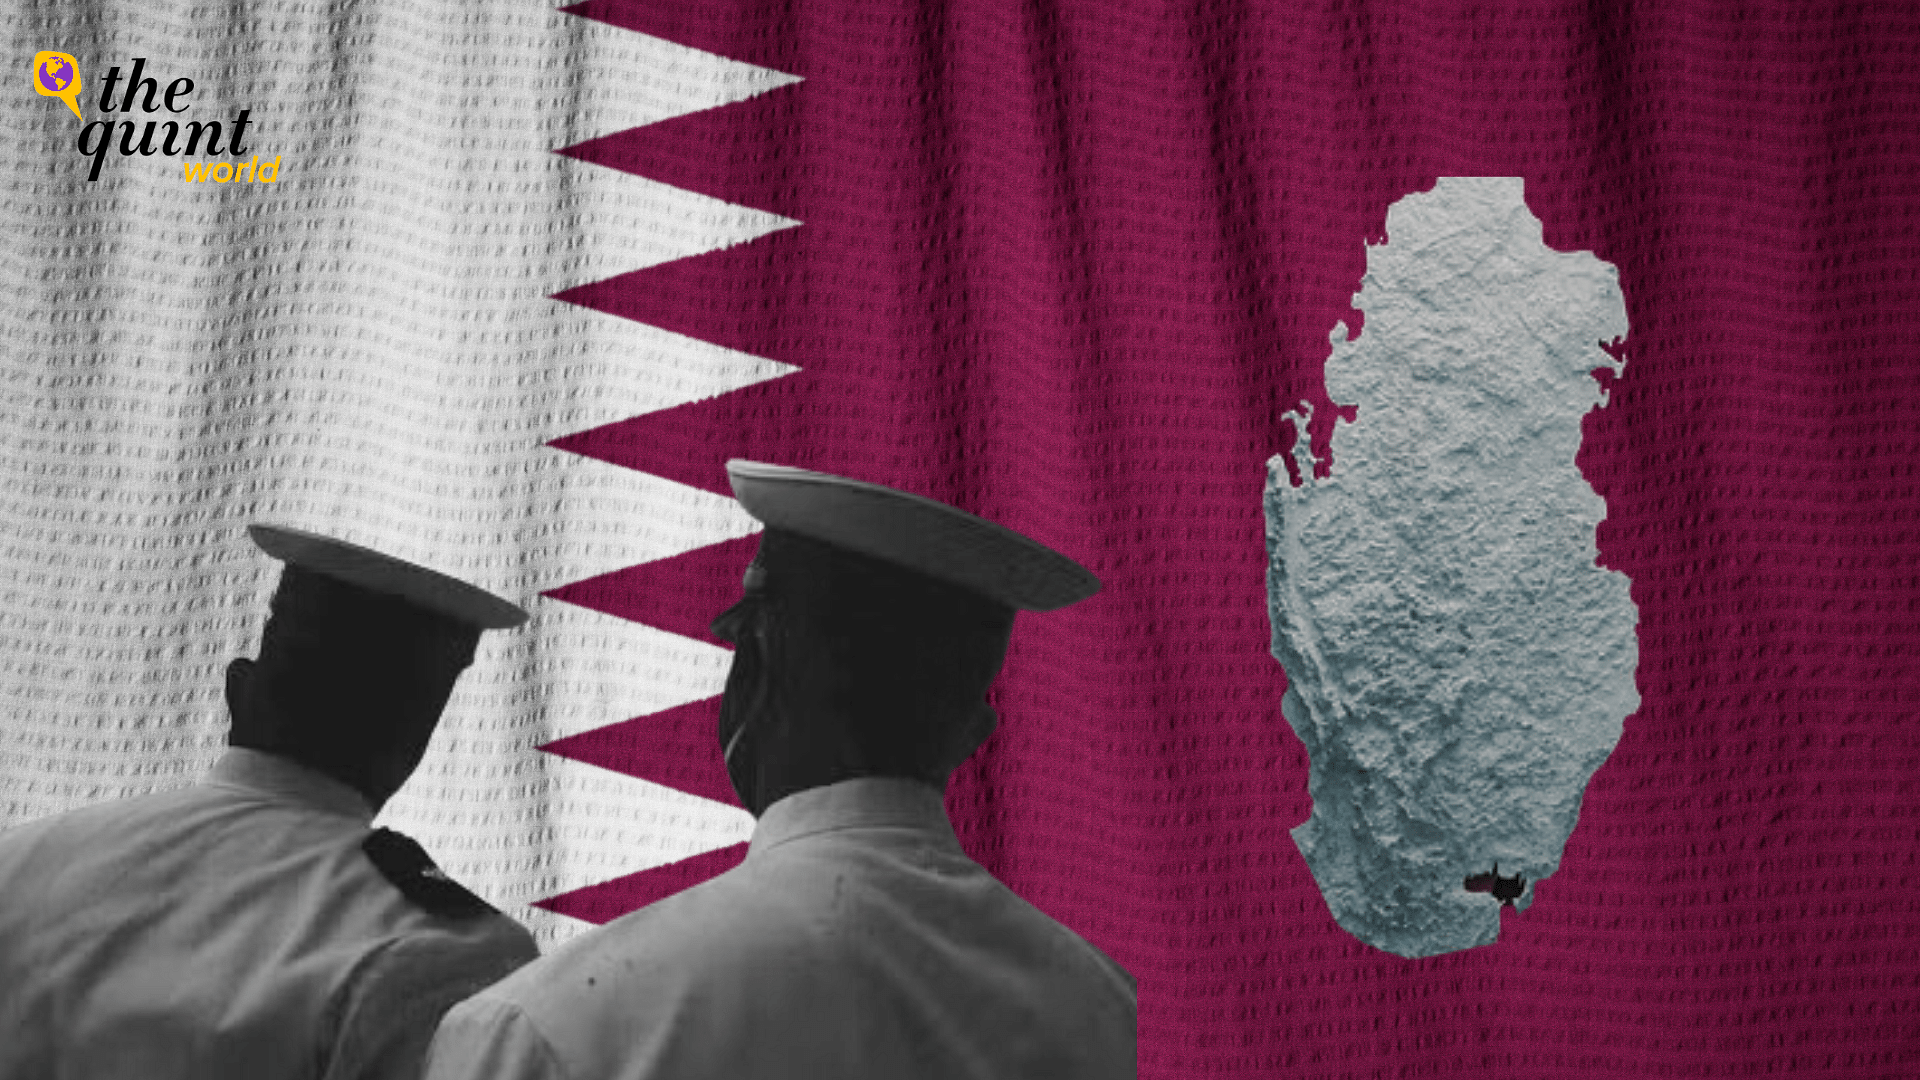 <div class="paragraphs"><p>The Quint had first reported on Wednesday, 23 November, that a Qatari court accepted the ex-servicemen's appeal document and will now study it to come to a decision in the case. </p></div>